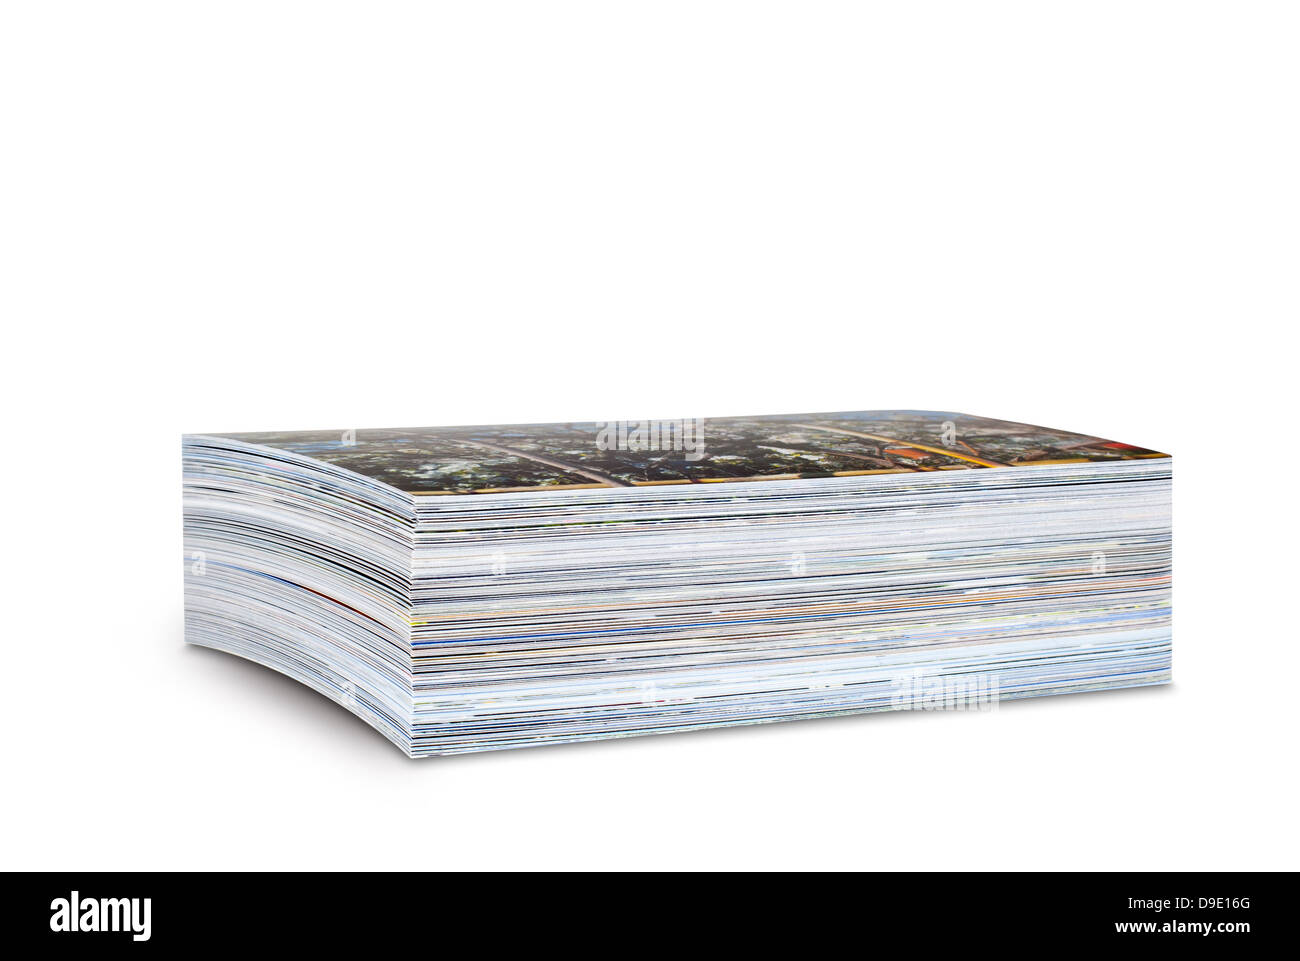 Pile of photos printed on photo paper Stock Photo